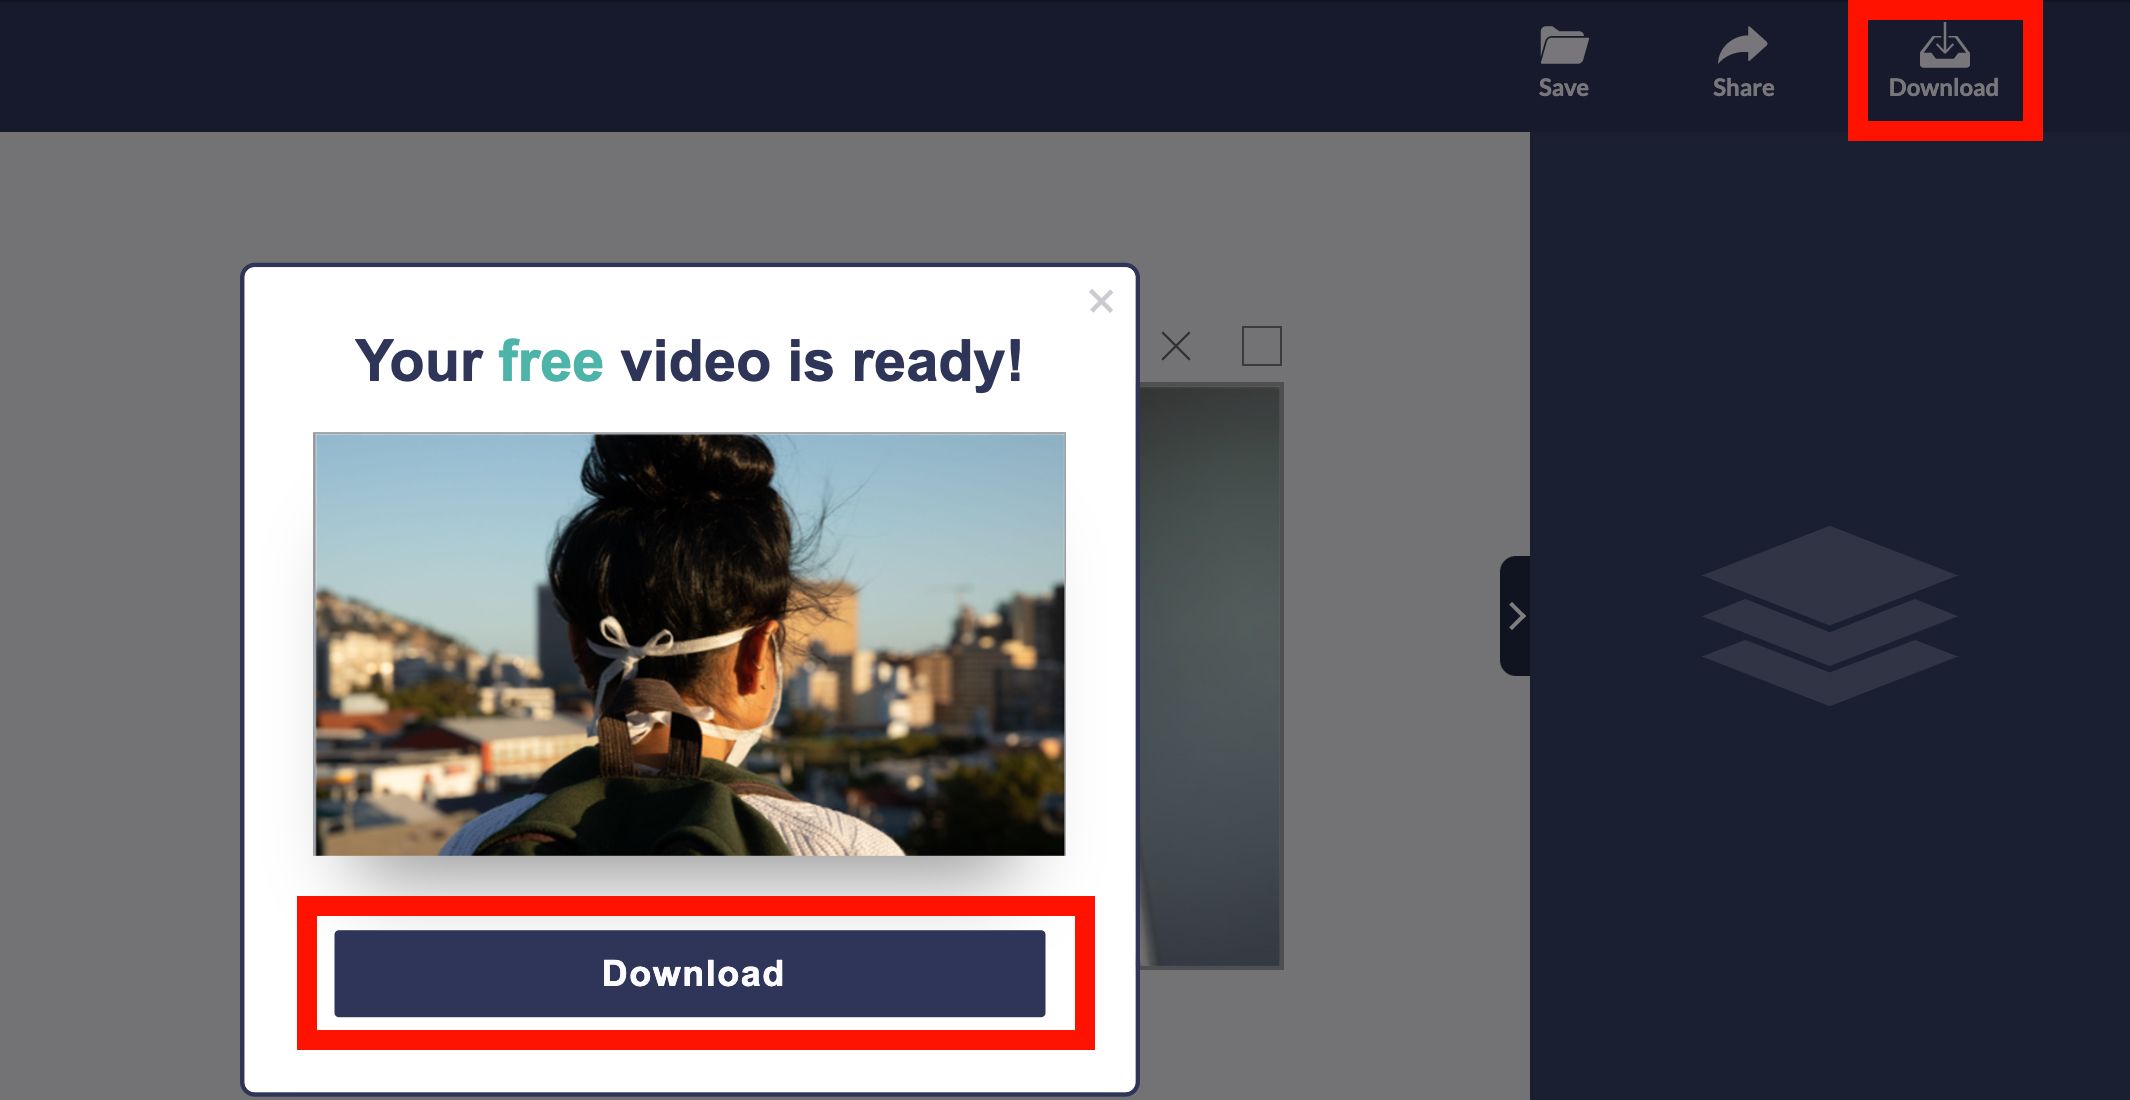 Download options on design wizard with button highlighted with a red box - Step-by-step guide on how to make a video from photos with the Design Wizard - Image